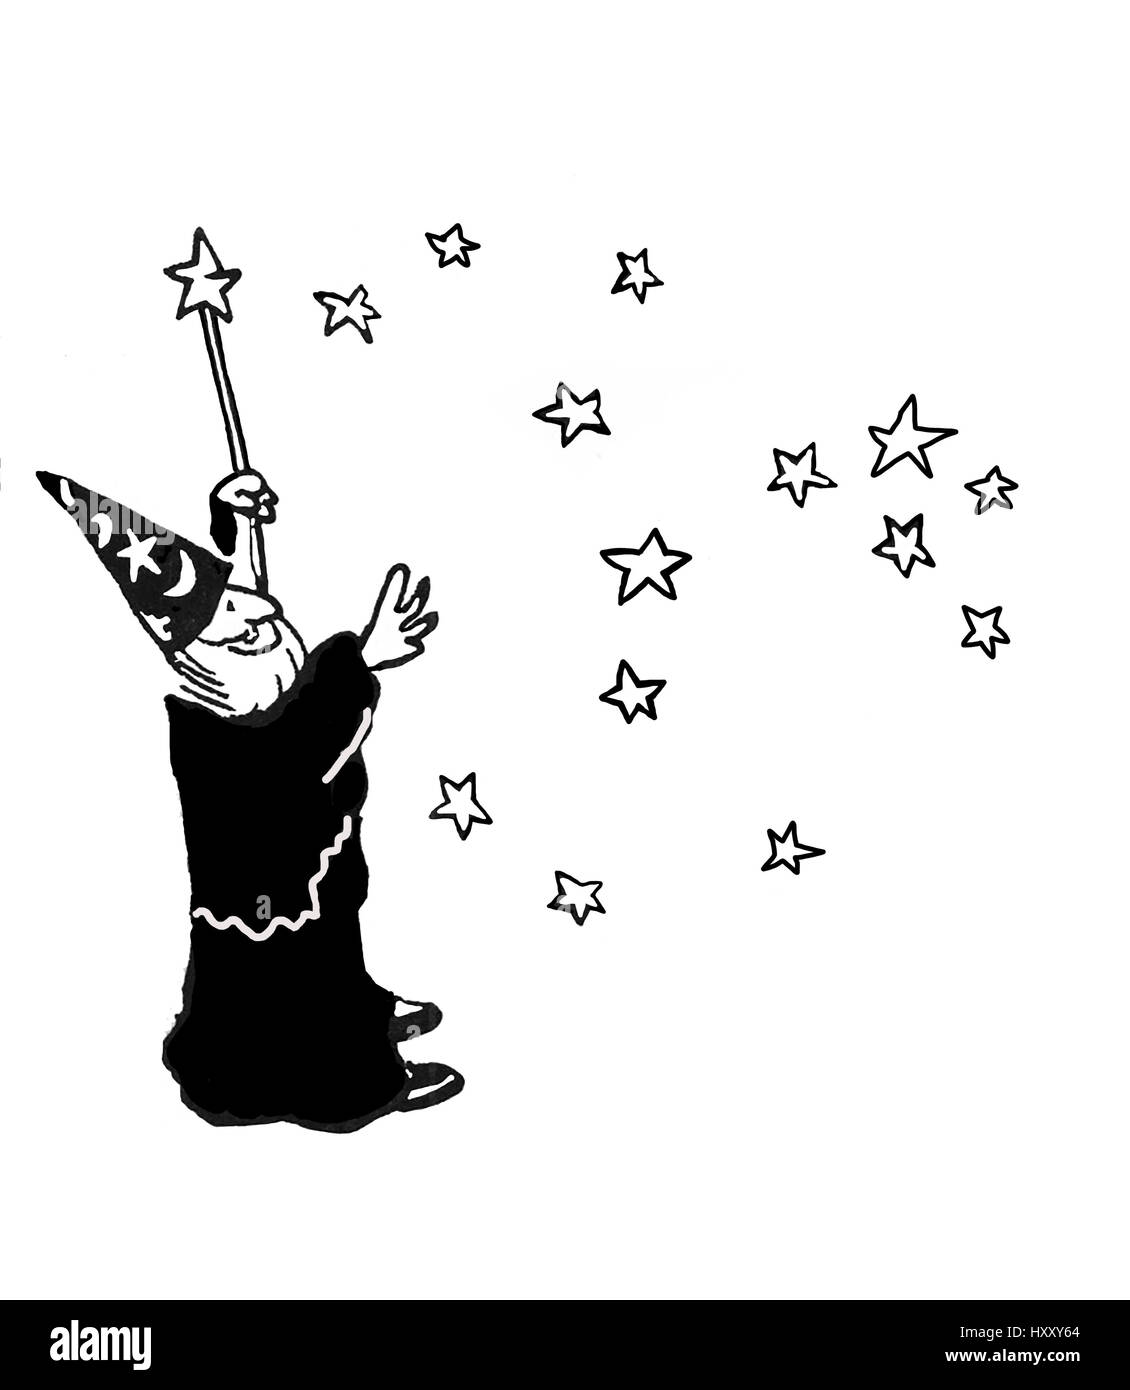 Cartoon illustration of a wizard granting wishes. Stock Photo